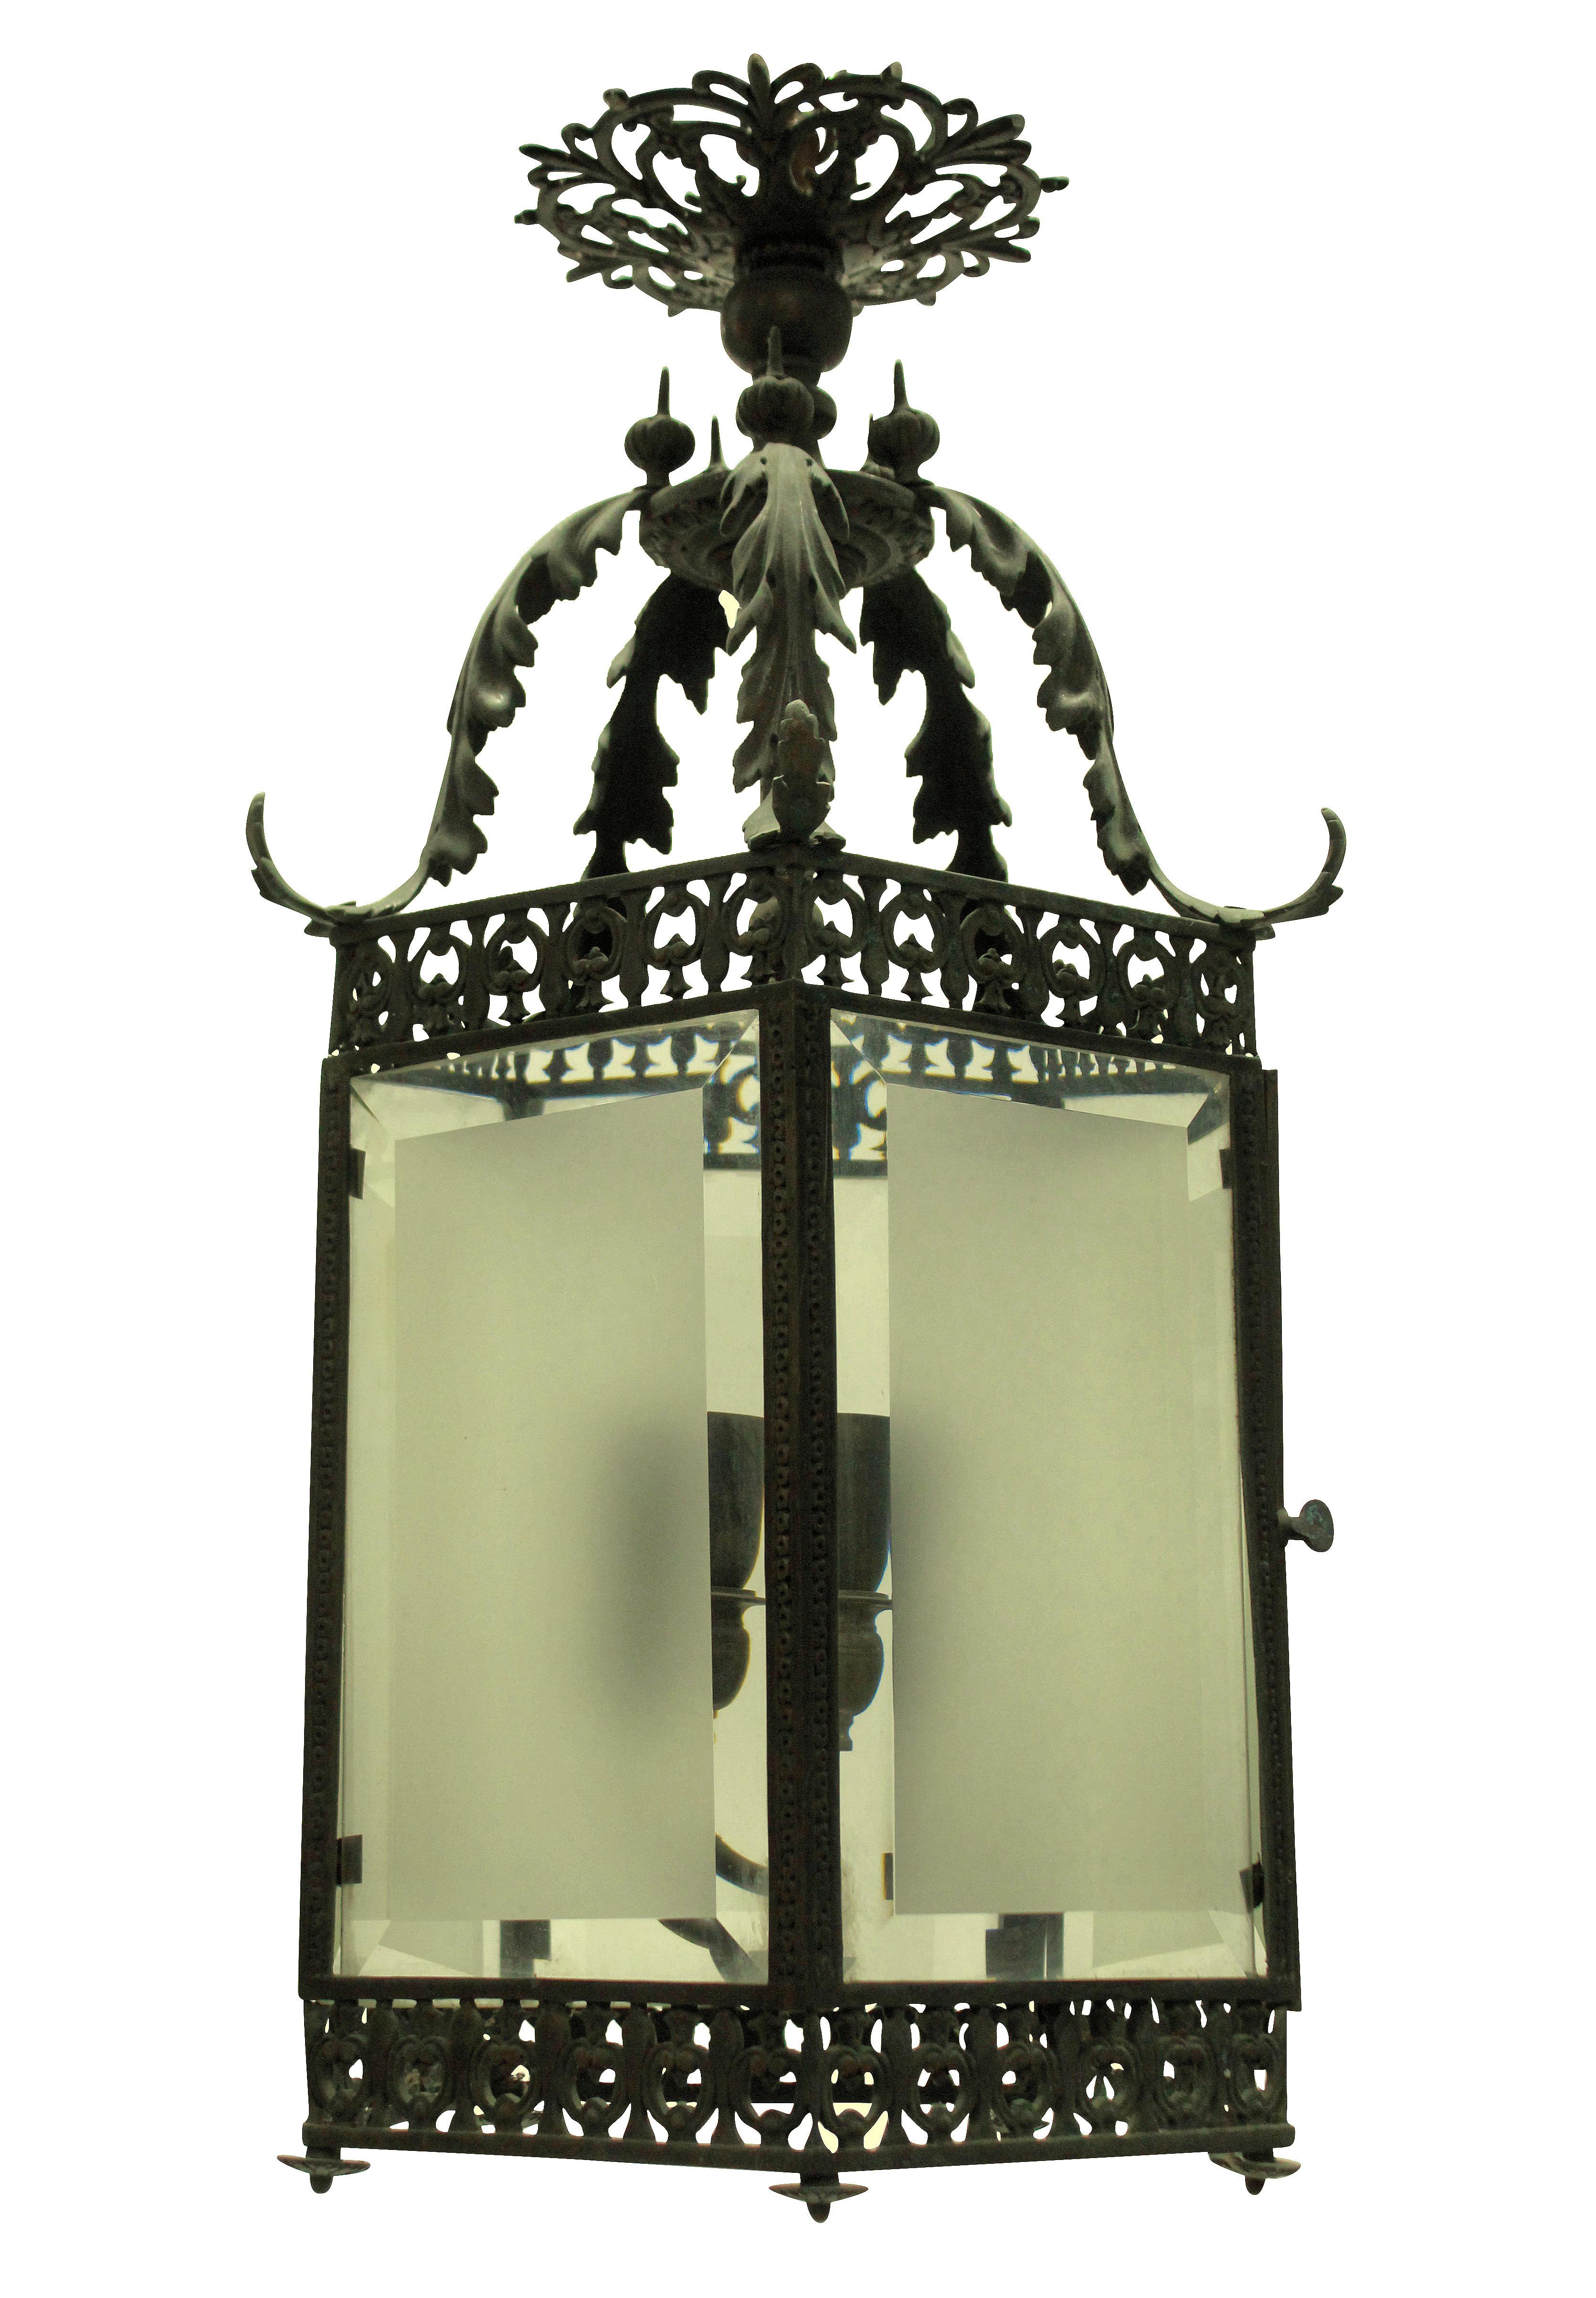 A fine English hexagonal hanging lantern in solid bronze with beveled and etched glass panels. In the 'Eastern' style.